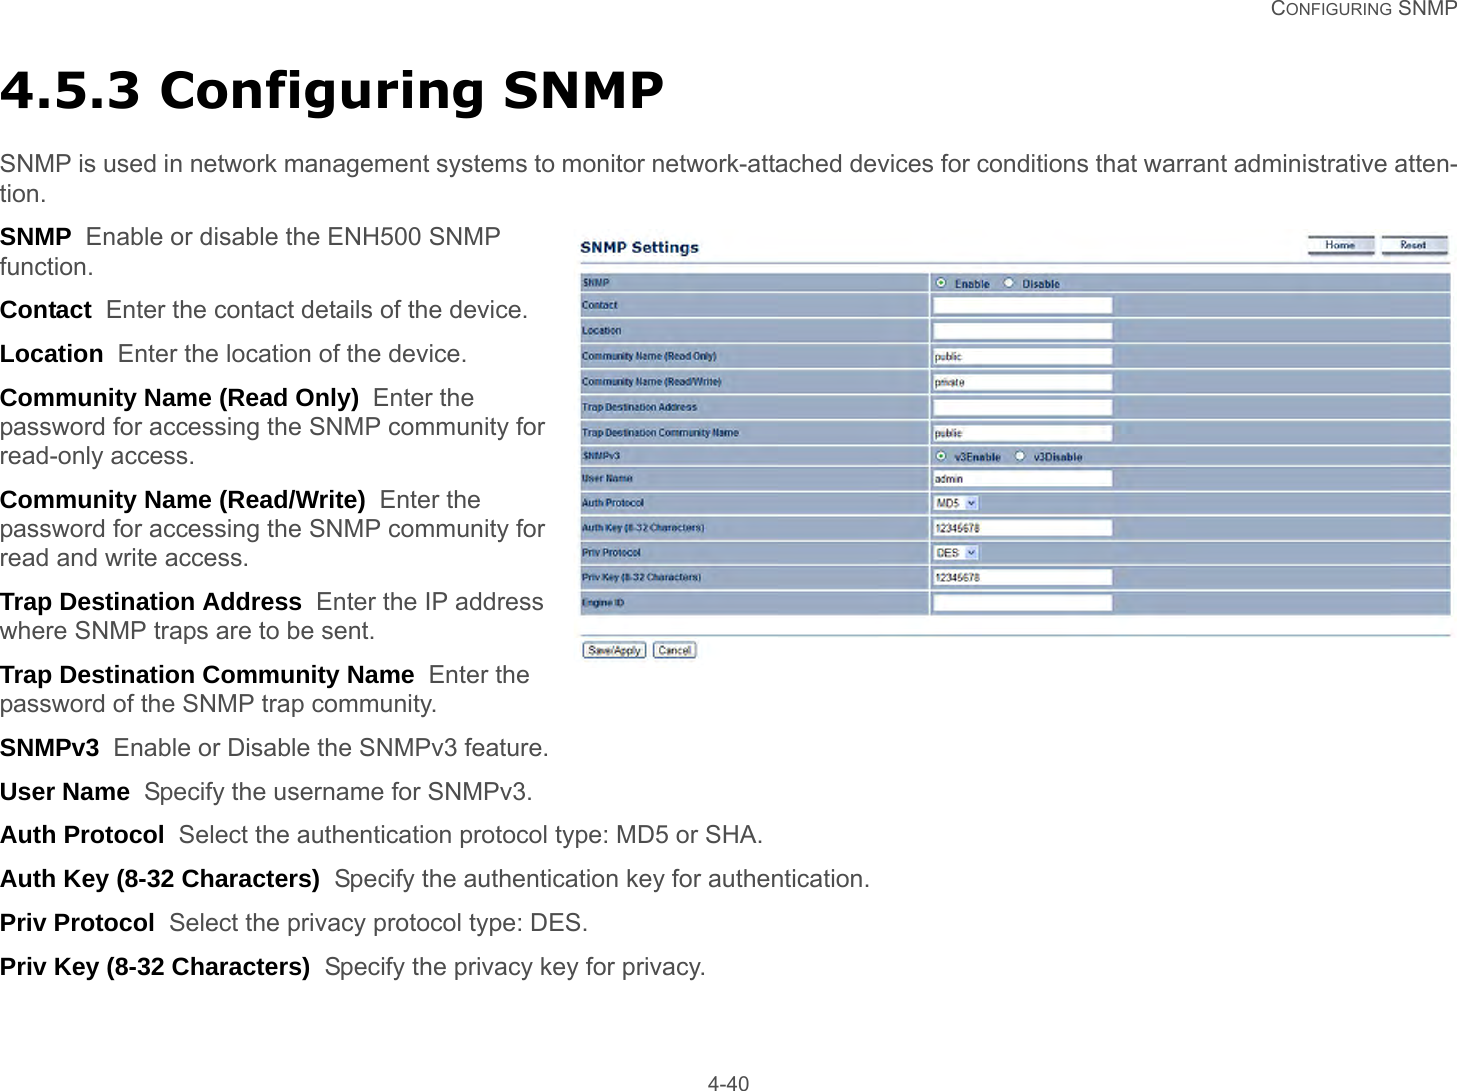   CONFIGURING SNMP 4-404.5.3 Configuring SNMPSNMP is used in network management systems to monitor network-attached devices for conditions that warrant administrative atten-tion.SNMP  Enable or disable the ENH500 SNMP function.Contact  Enter the contact details of the device.Location  Enter the location of the device.Community Name (Read Only)  Enter the password for accessing the SNMP community for read-only access.Community Name (Read/Write)  Enter the password for accessing the SNMP community for read and write access.Trap Destination Address  Enter the IP address where SNMP traps are to be sent.Trap Destination Community Name  Enter the password of the SNMP trap community.SNMPv3  Enable or Disable the SNMPv3 feature.User Name  Specify the username for SNMPv3.Auth Protocol  Select the authentication protocol type: MD5 or SHA.Auth Key (8-32 Characters)  Specify the authentication key for authentication.Priv Protocol  Select the privacy protocol type: DES.Priv Key (8-32 Characters)  Specify the privacy key for privacy.